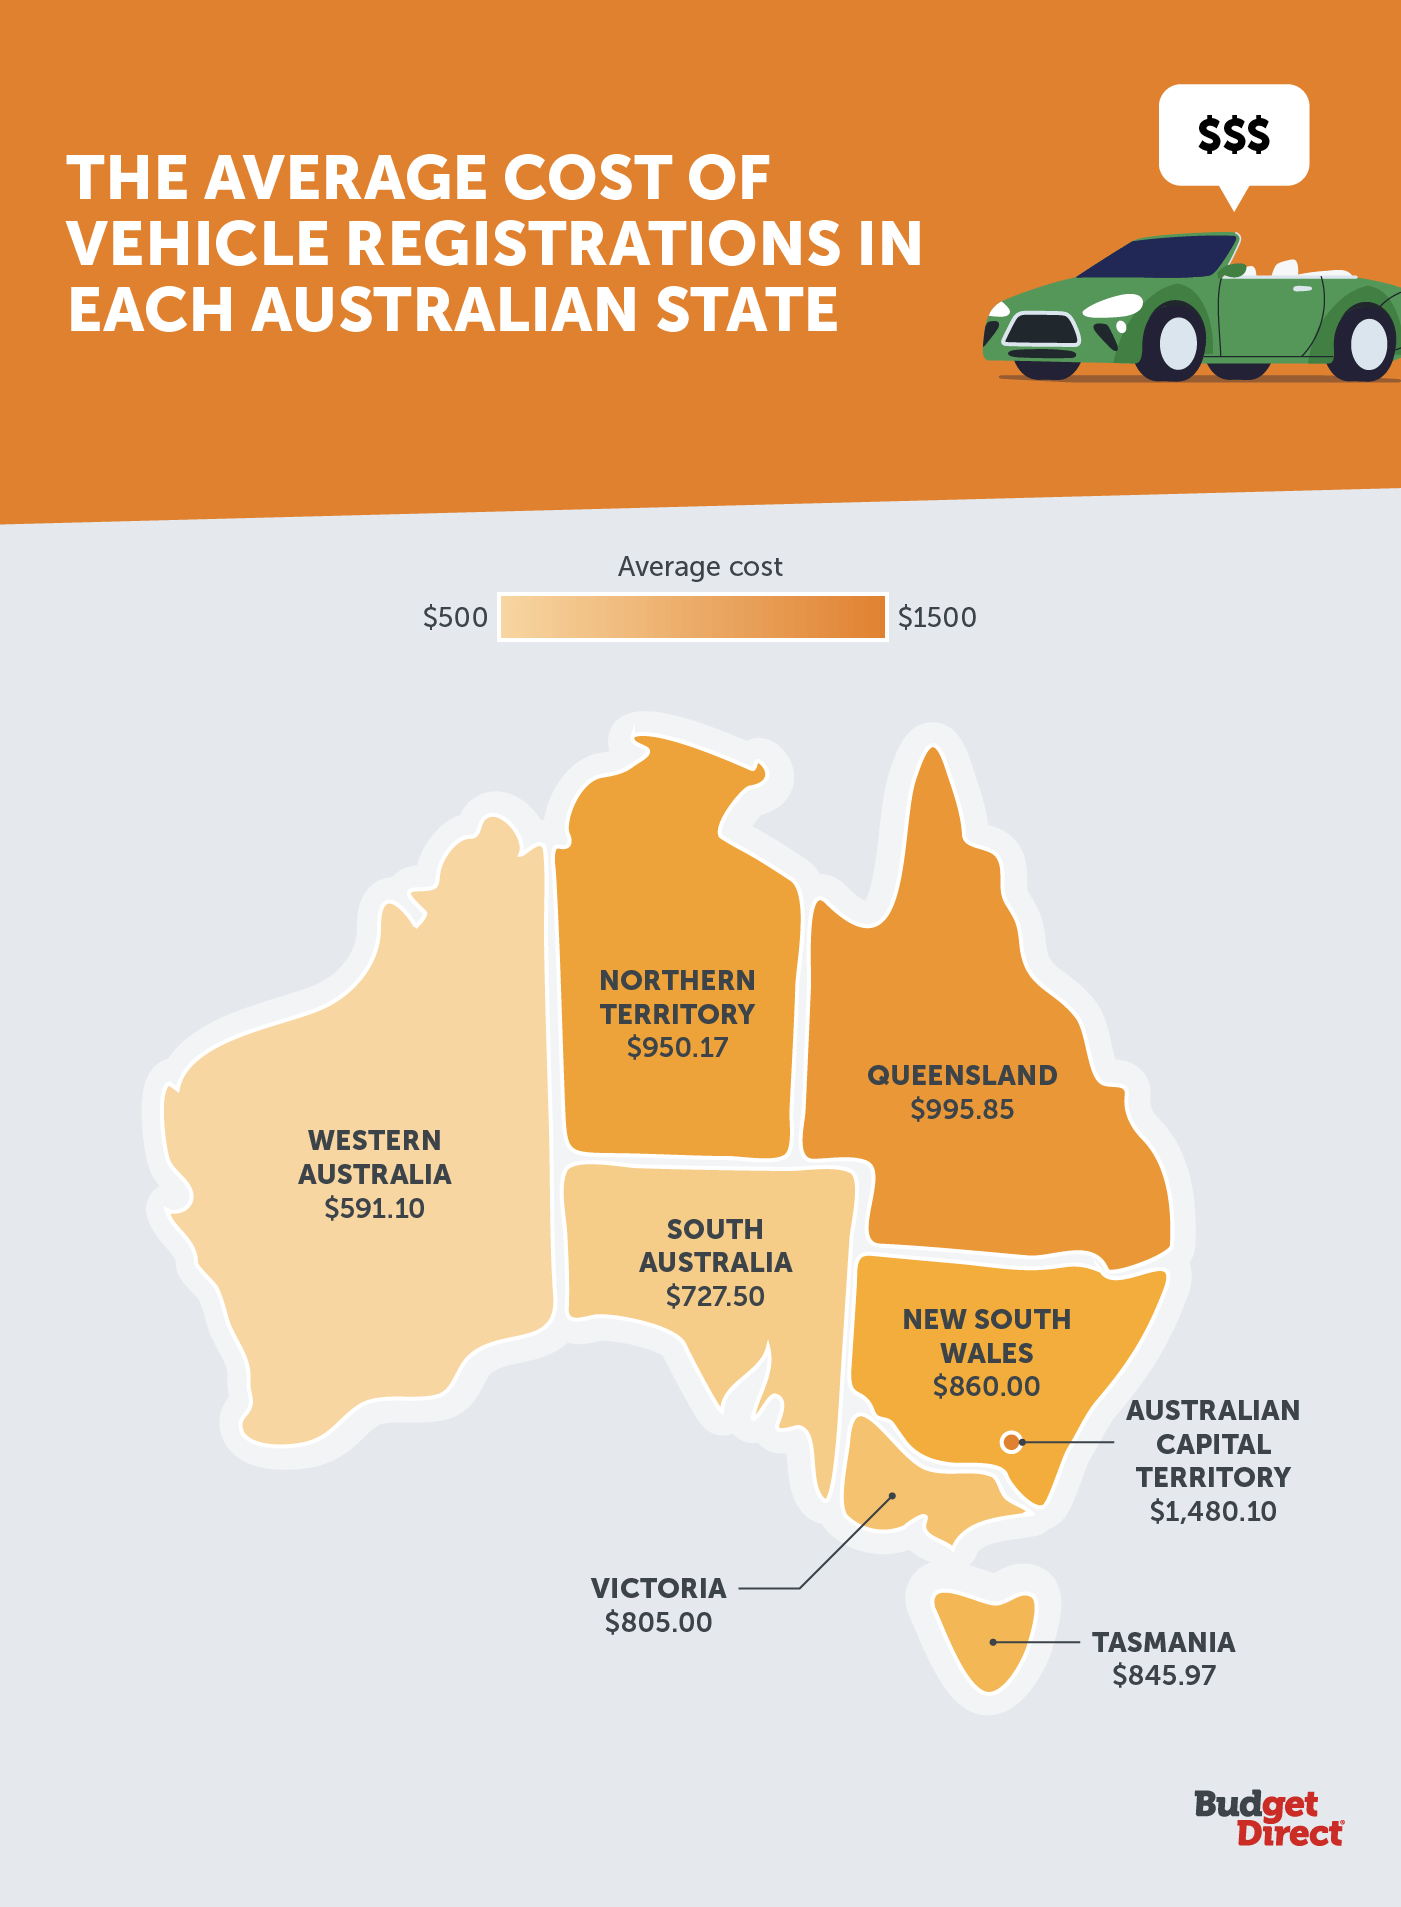 The average cost of vehicle registrations in each Australian state